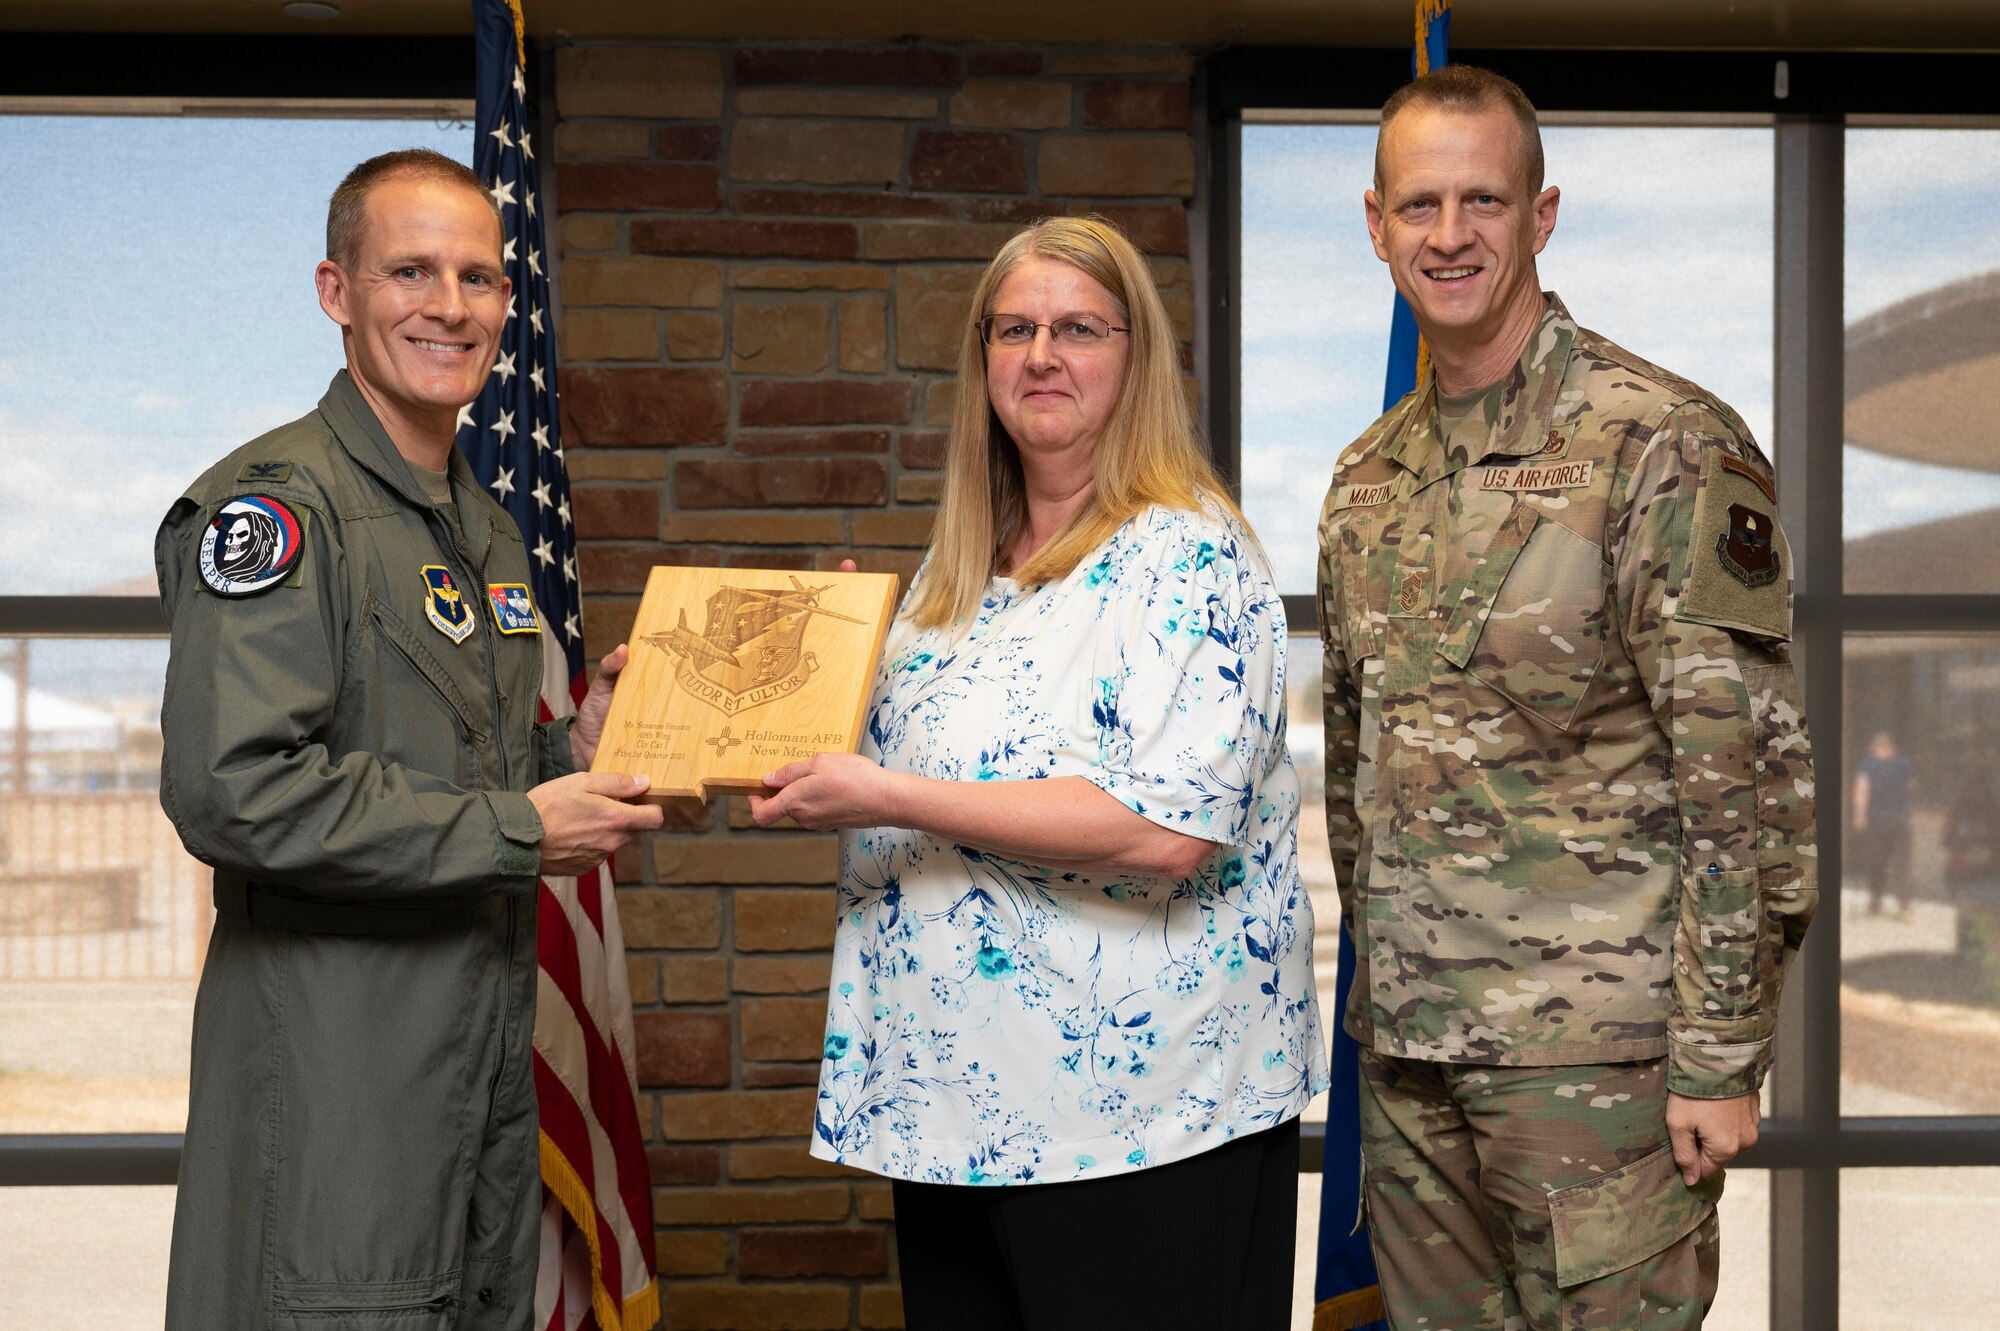 Suzanne Houston, from the 49th Logistics Readiness Squadron, accepts the 49th Wing Category I Non-Supervisory Civilian of the Quarter Award, during the 49th Wing’s 2nd Quarter Award ceremony at Holloman Air Force Base, New Mexico, Aug. 11, 2023. Quarterly award winners were selected based on their technical expertise, demonstration of leadership and job performance. (U.S. Air Force photo by Airman 1st Class Michelle Ferrari)